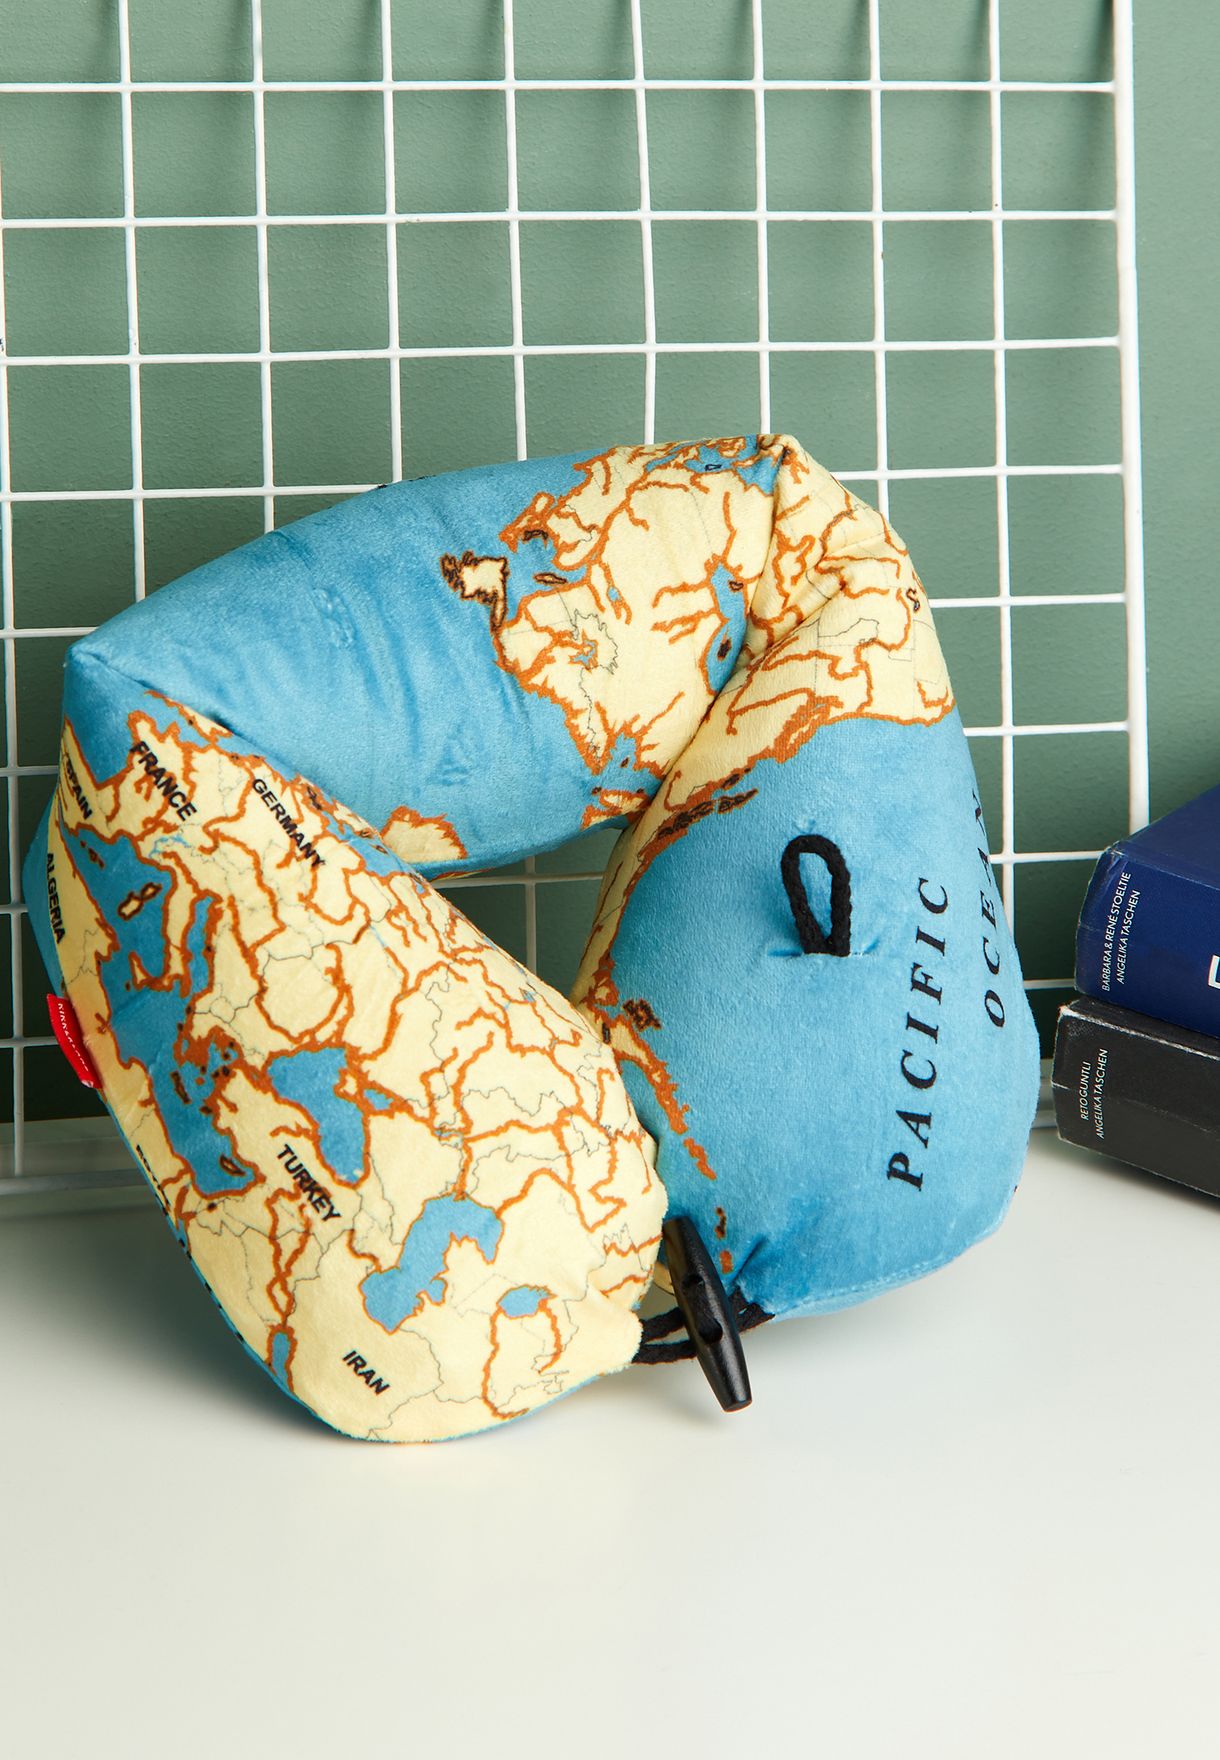 Inflatable Map Neck Pillow